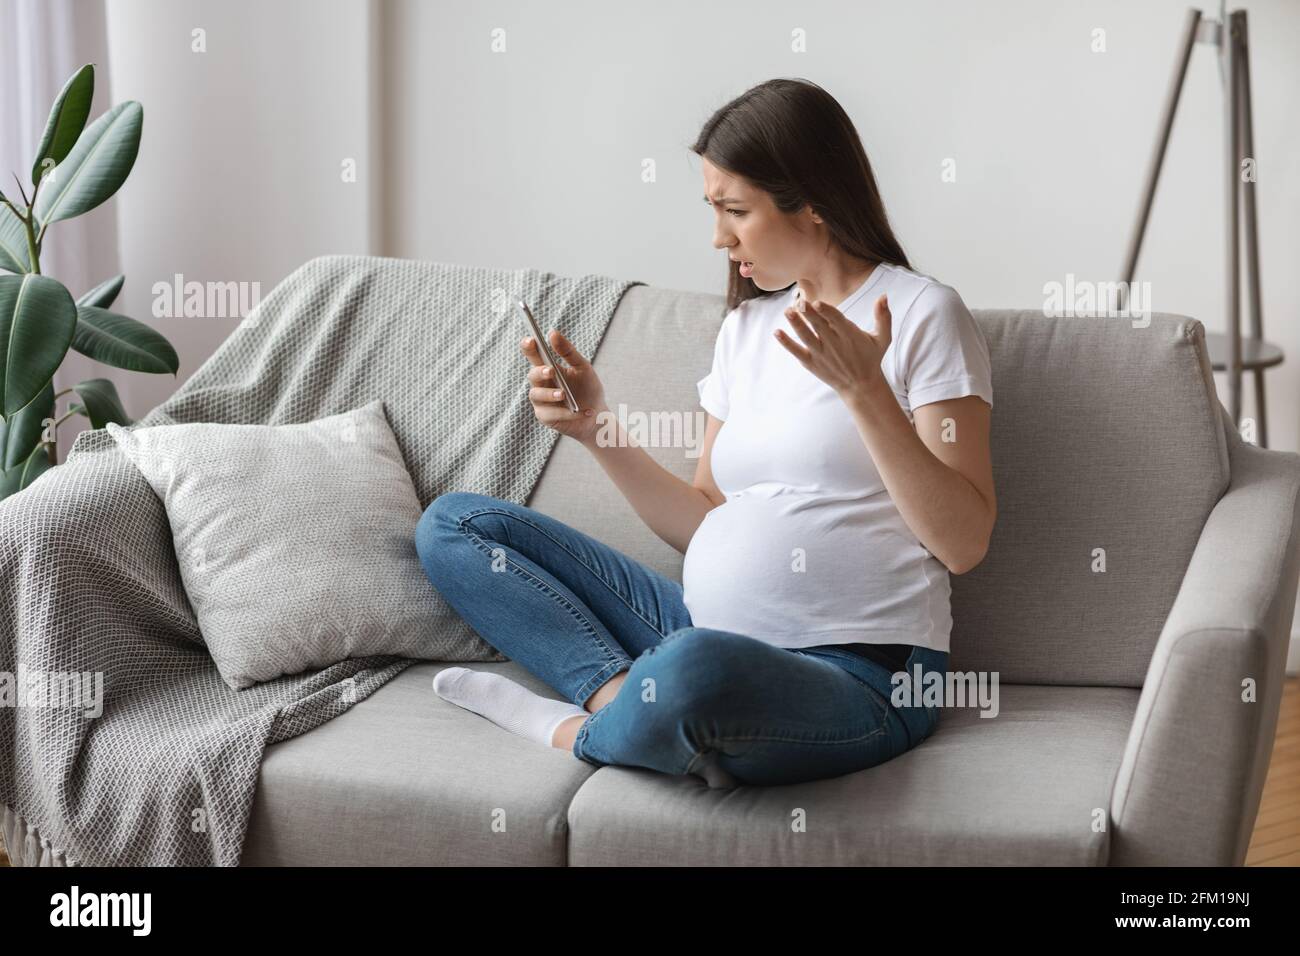 Stressed Young Pregnant Woman Looking At Smartphone Screen While Relaxing On Couch Stock Photo